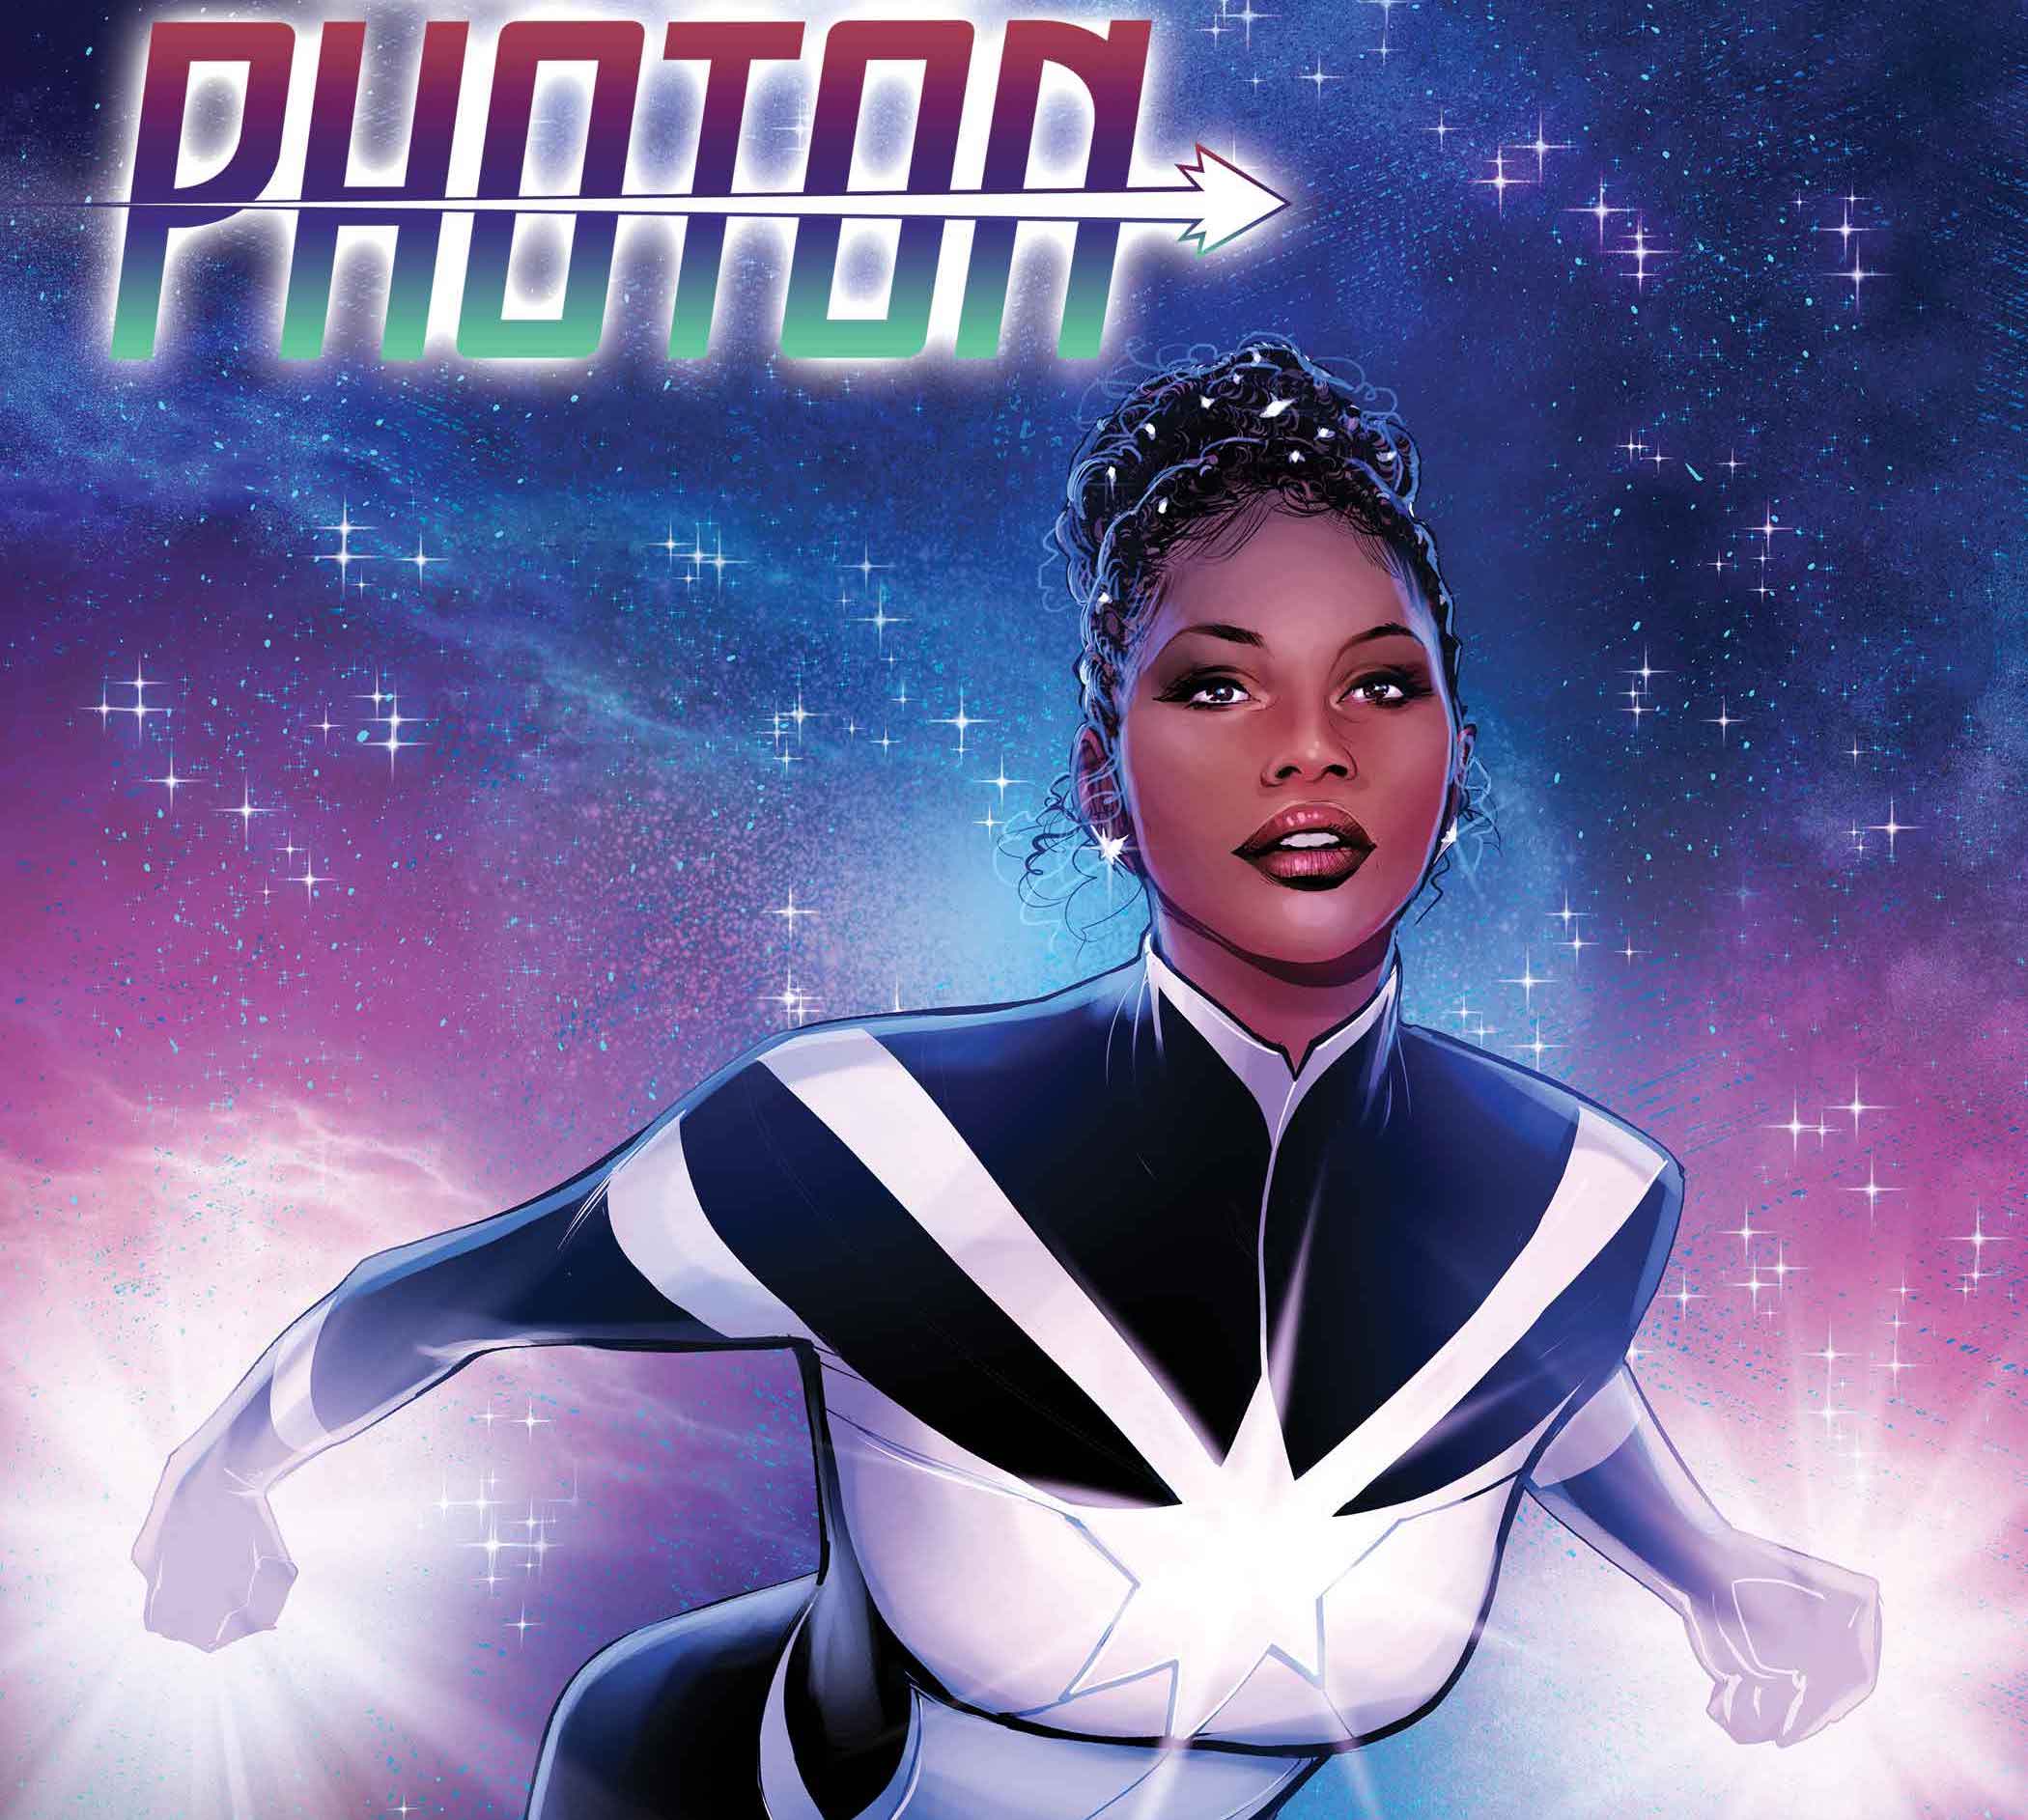 EXCLUSIVE Marvel Preview: Monica Rambeau: Photon #1